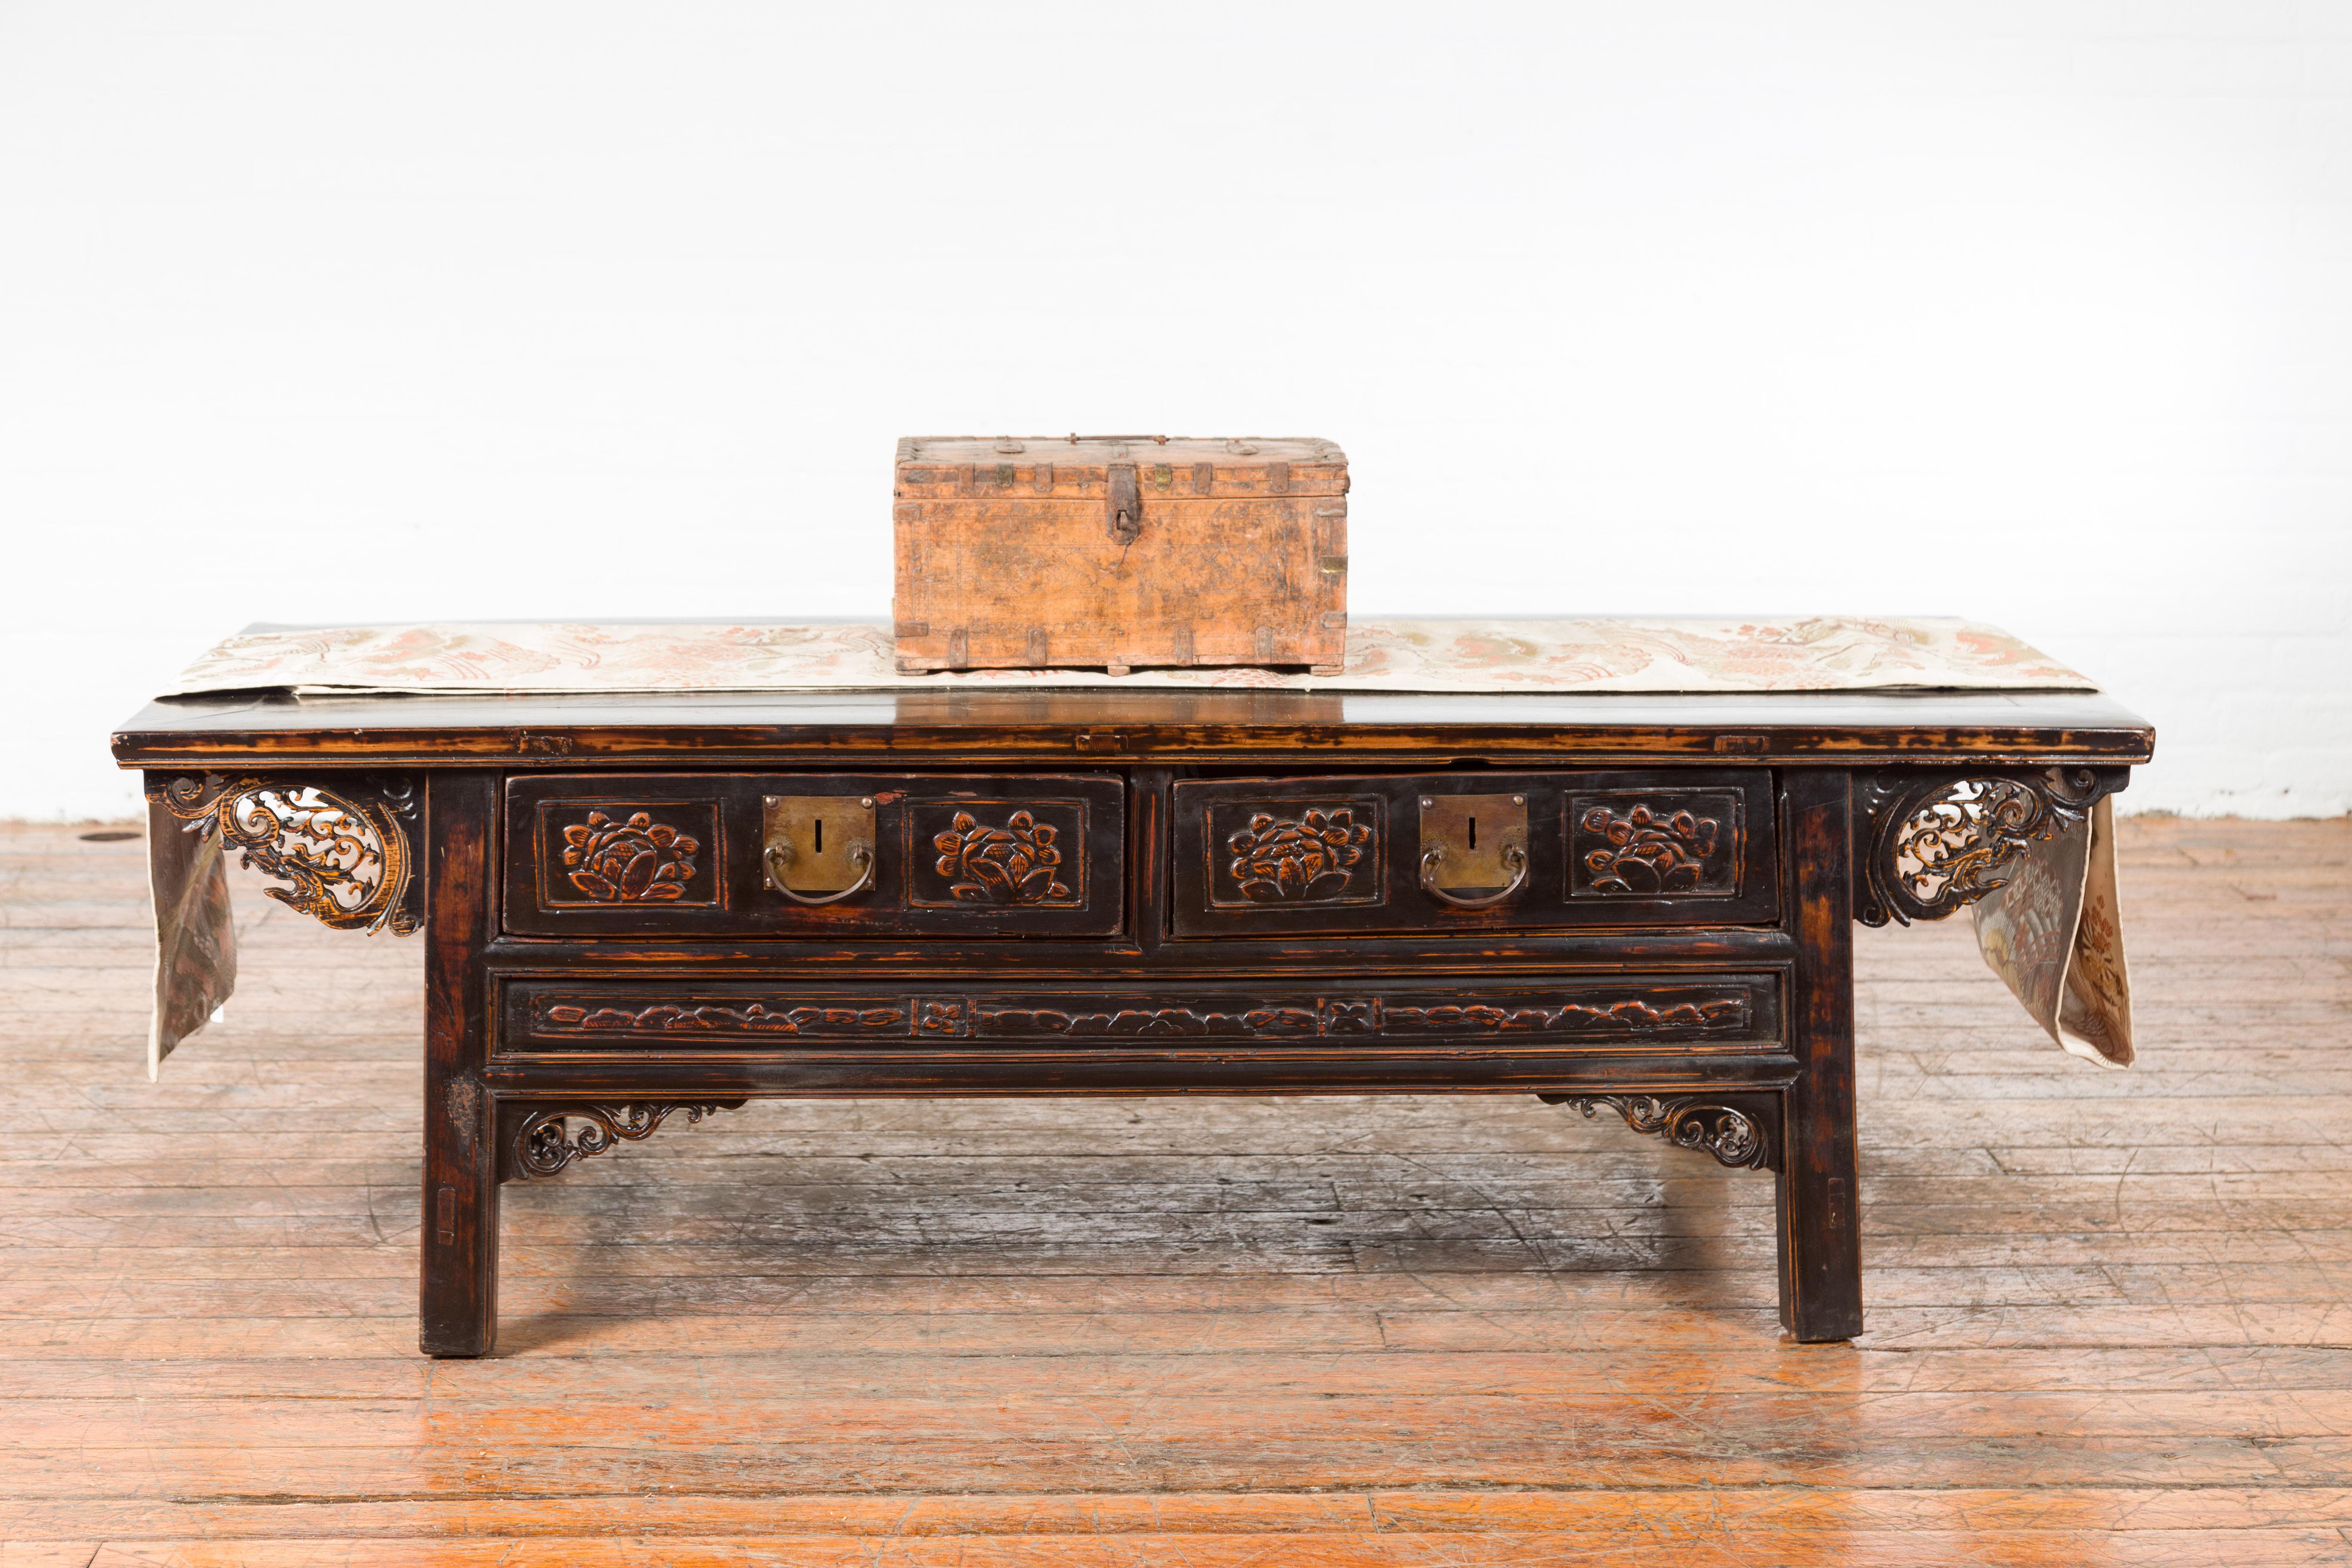 Rustic Indian 19th Century Compartmented Box with Iron Details and Carved Motifs In Good Condition For Sale In Yonkers, NY